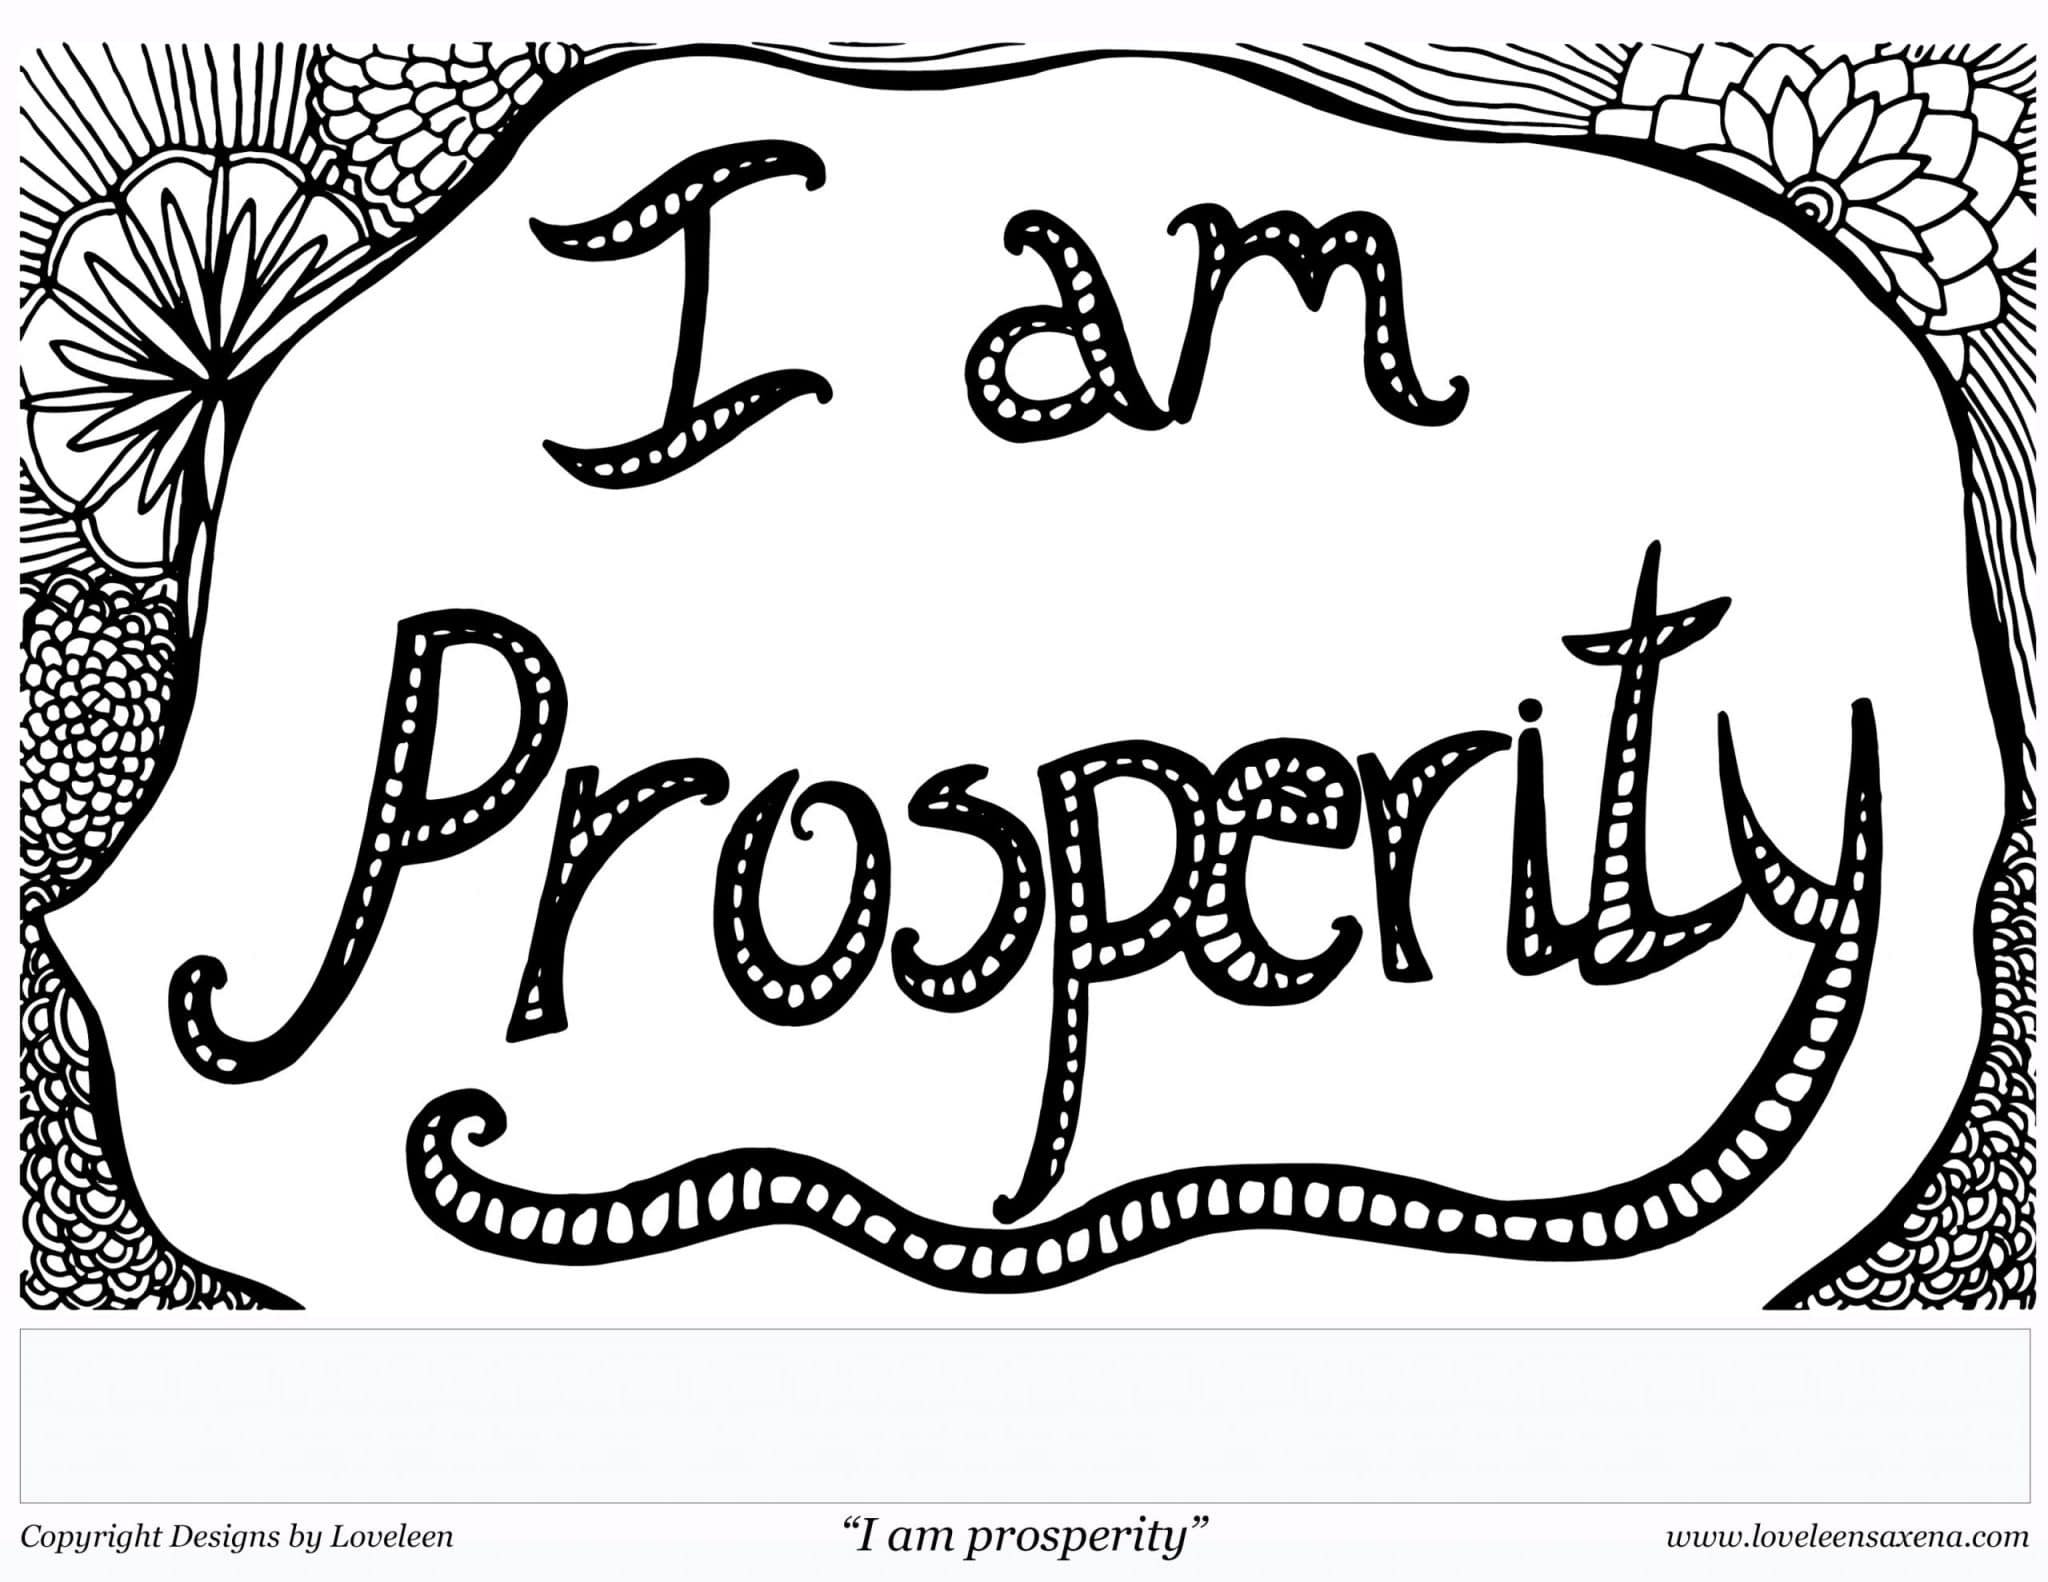 I am prosperity - coloring page